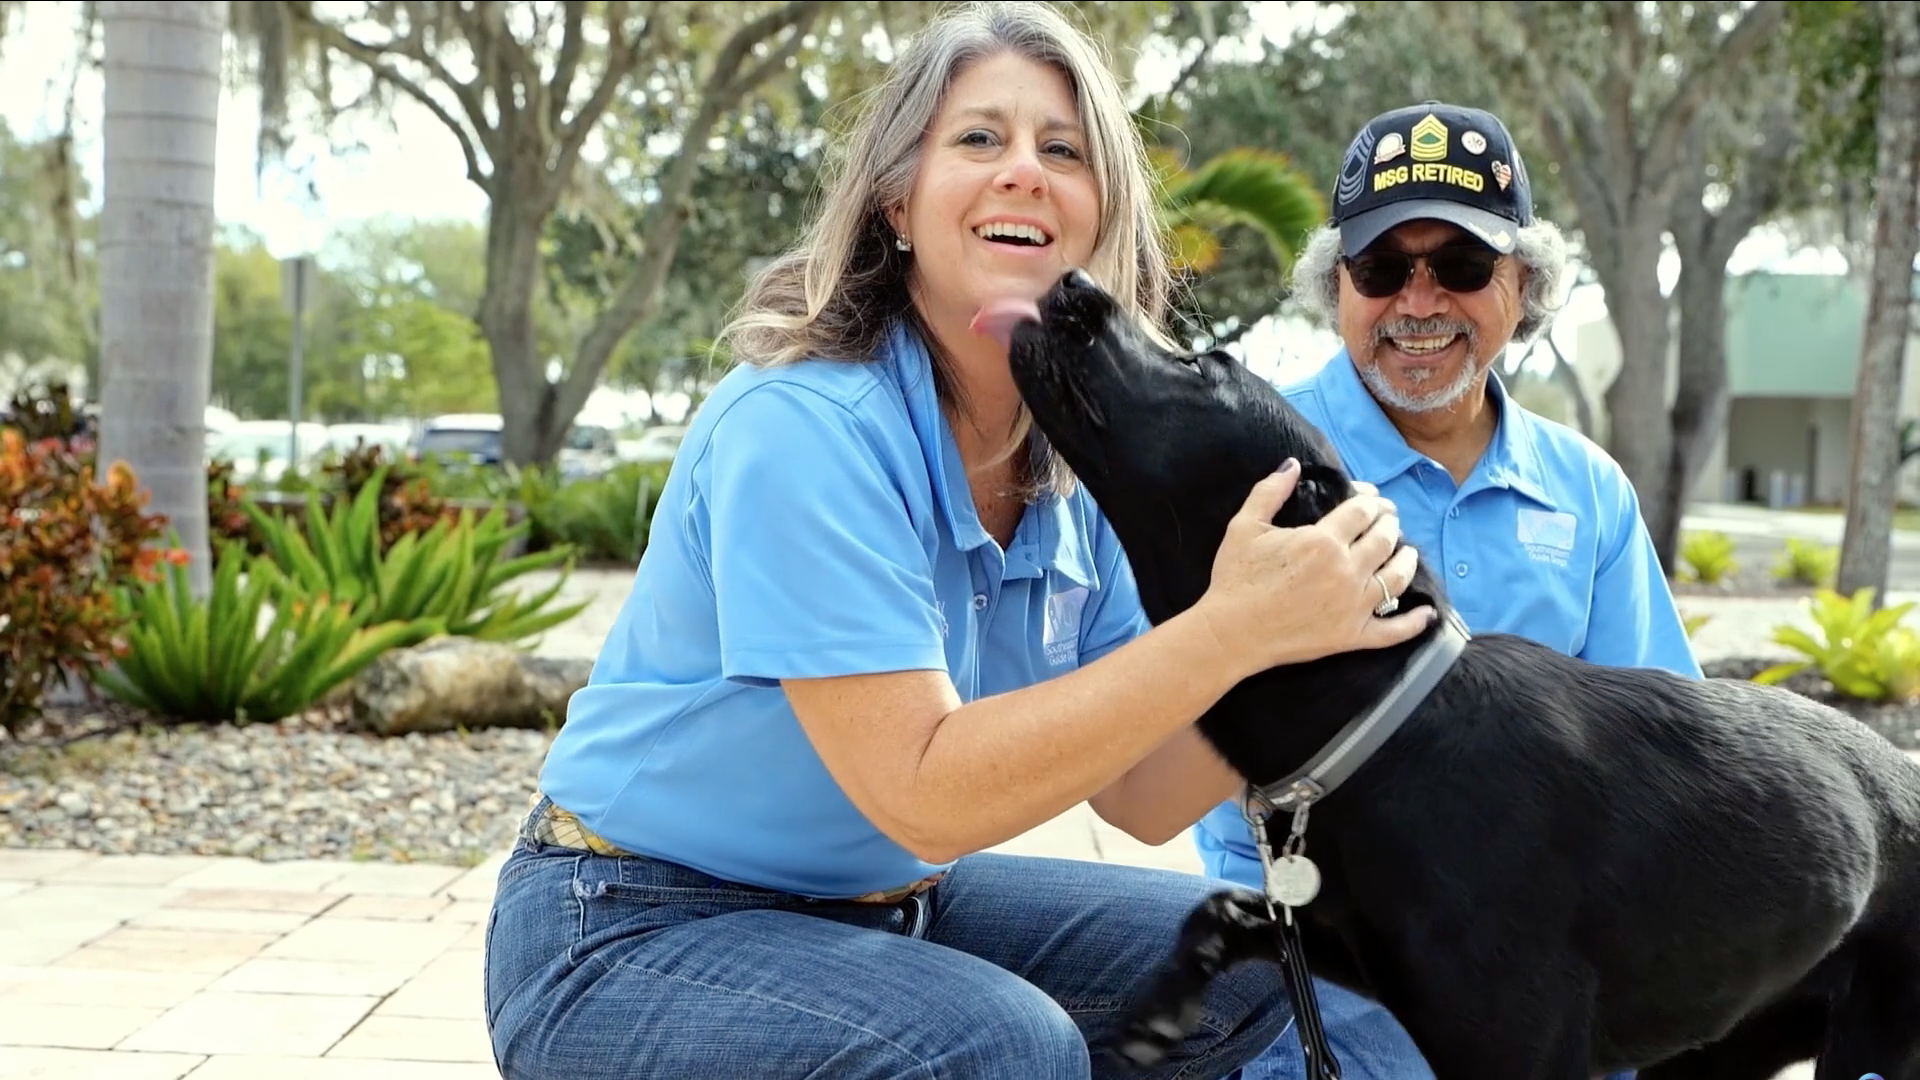 Two puppy raisers sit and see black lab for first time since going in for training, a lady smiles as she is being kissed while the man smiles looking at the two